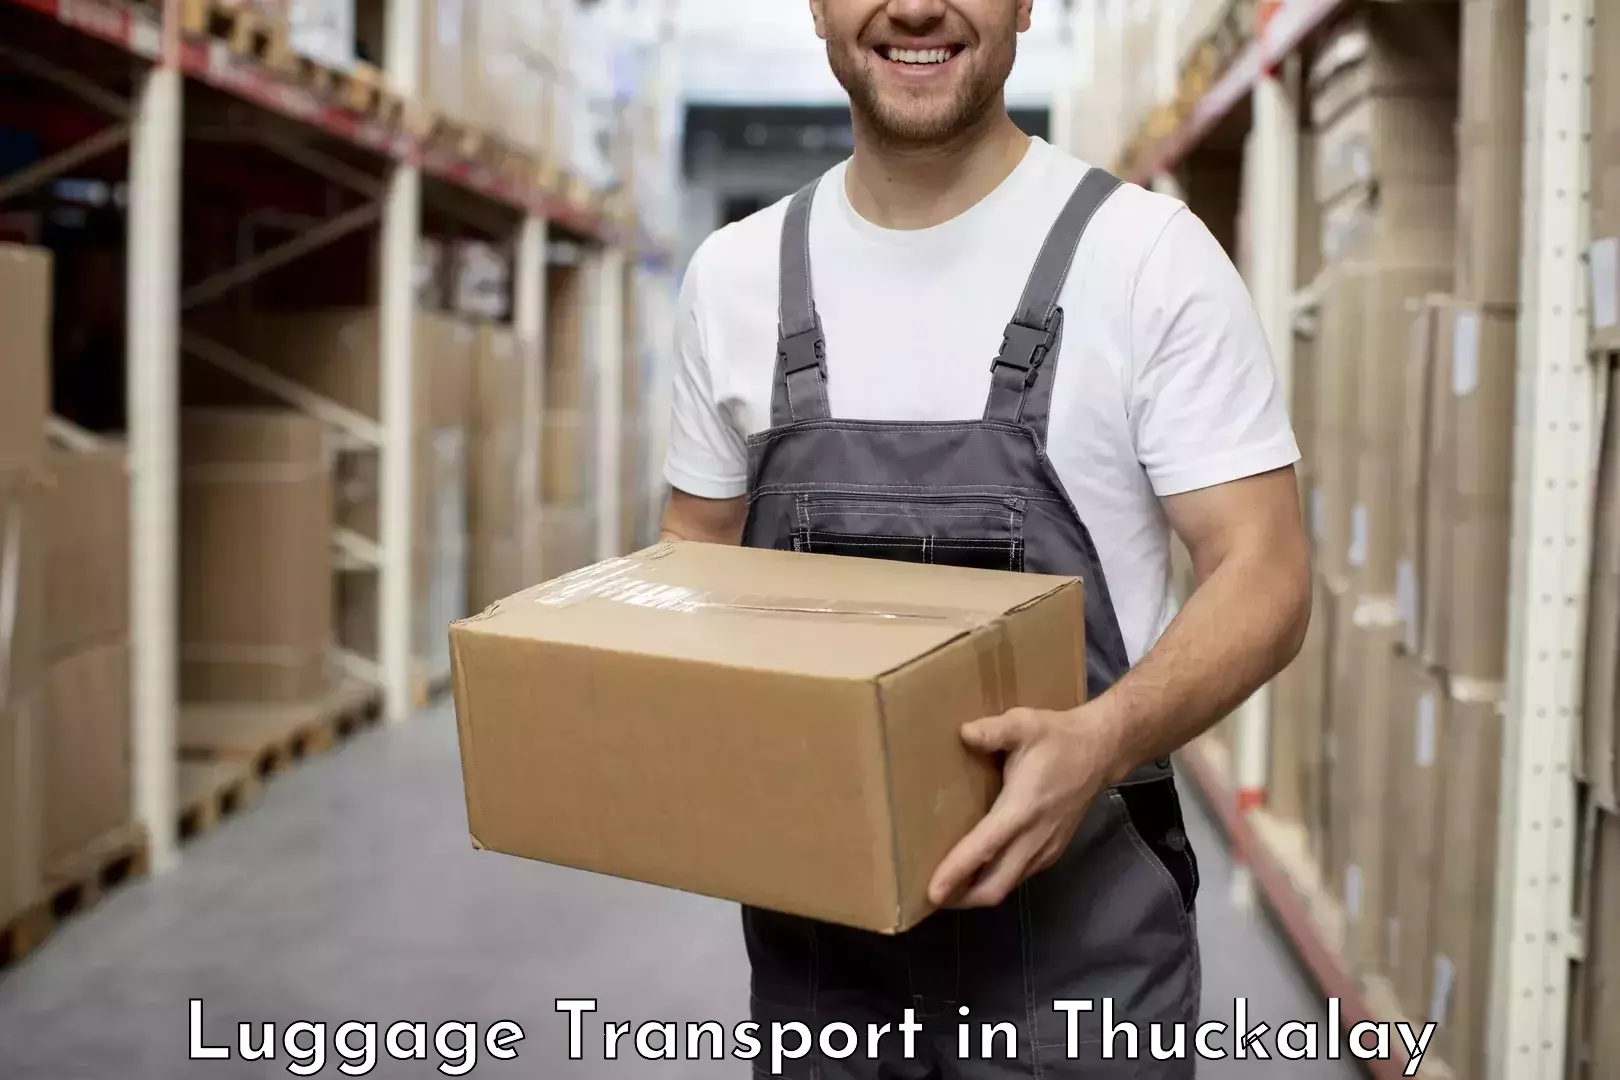 Luggage transport rates in Thuckalay